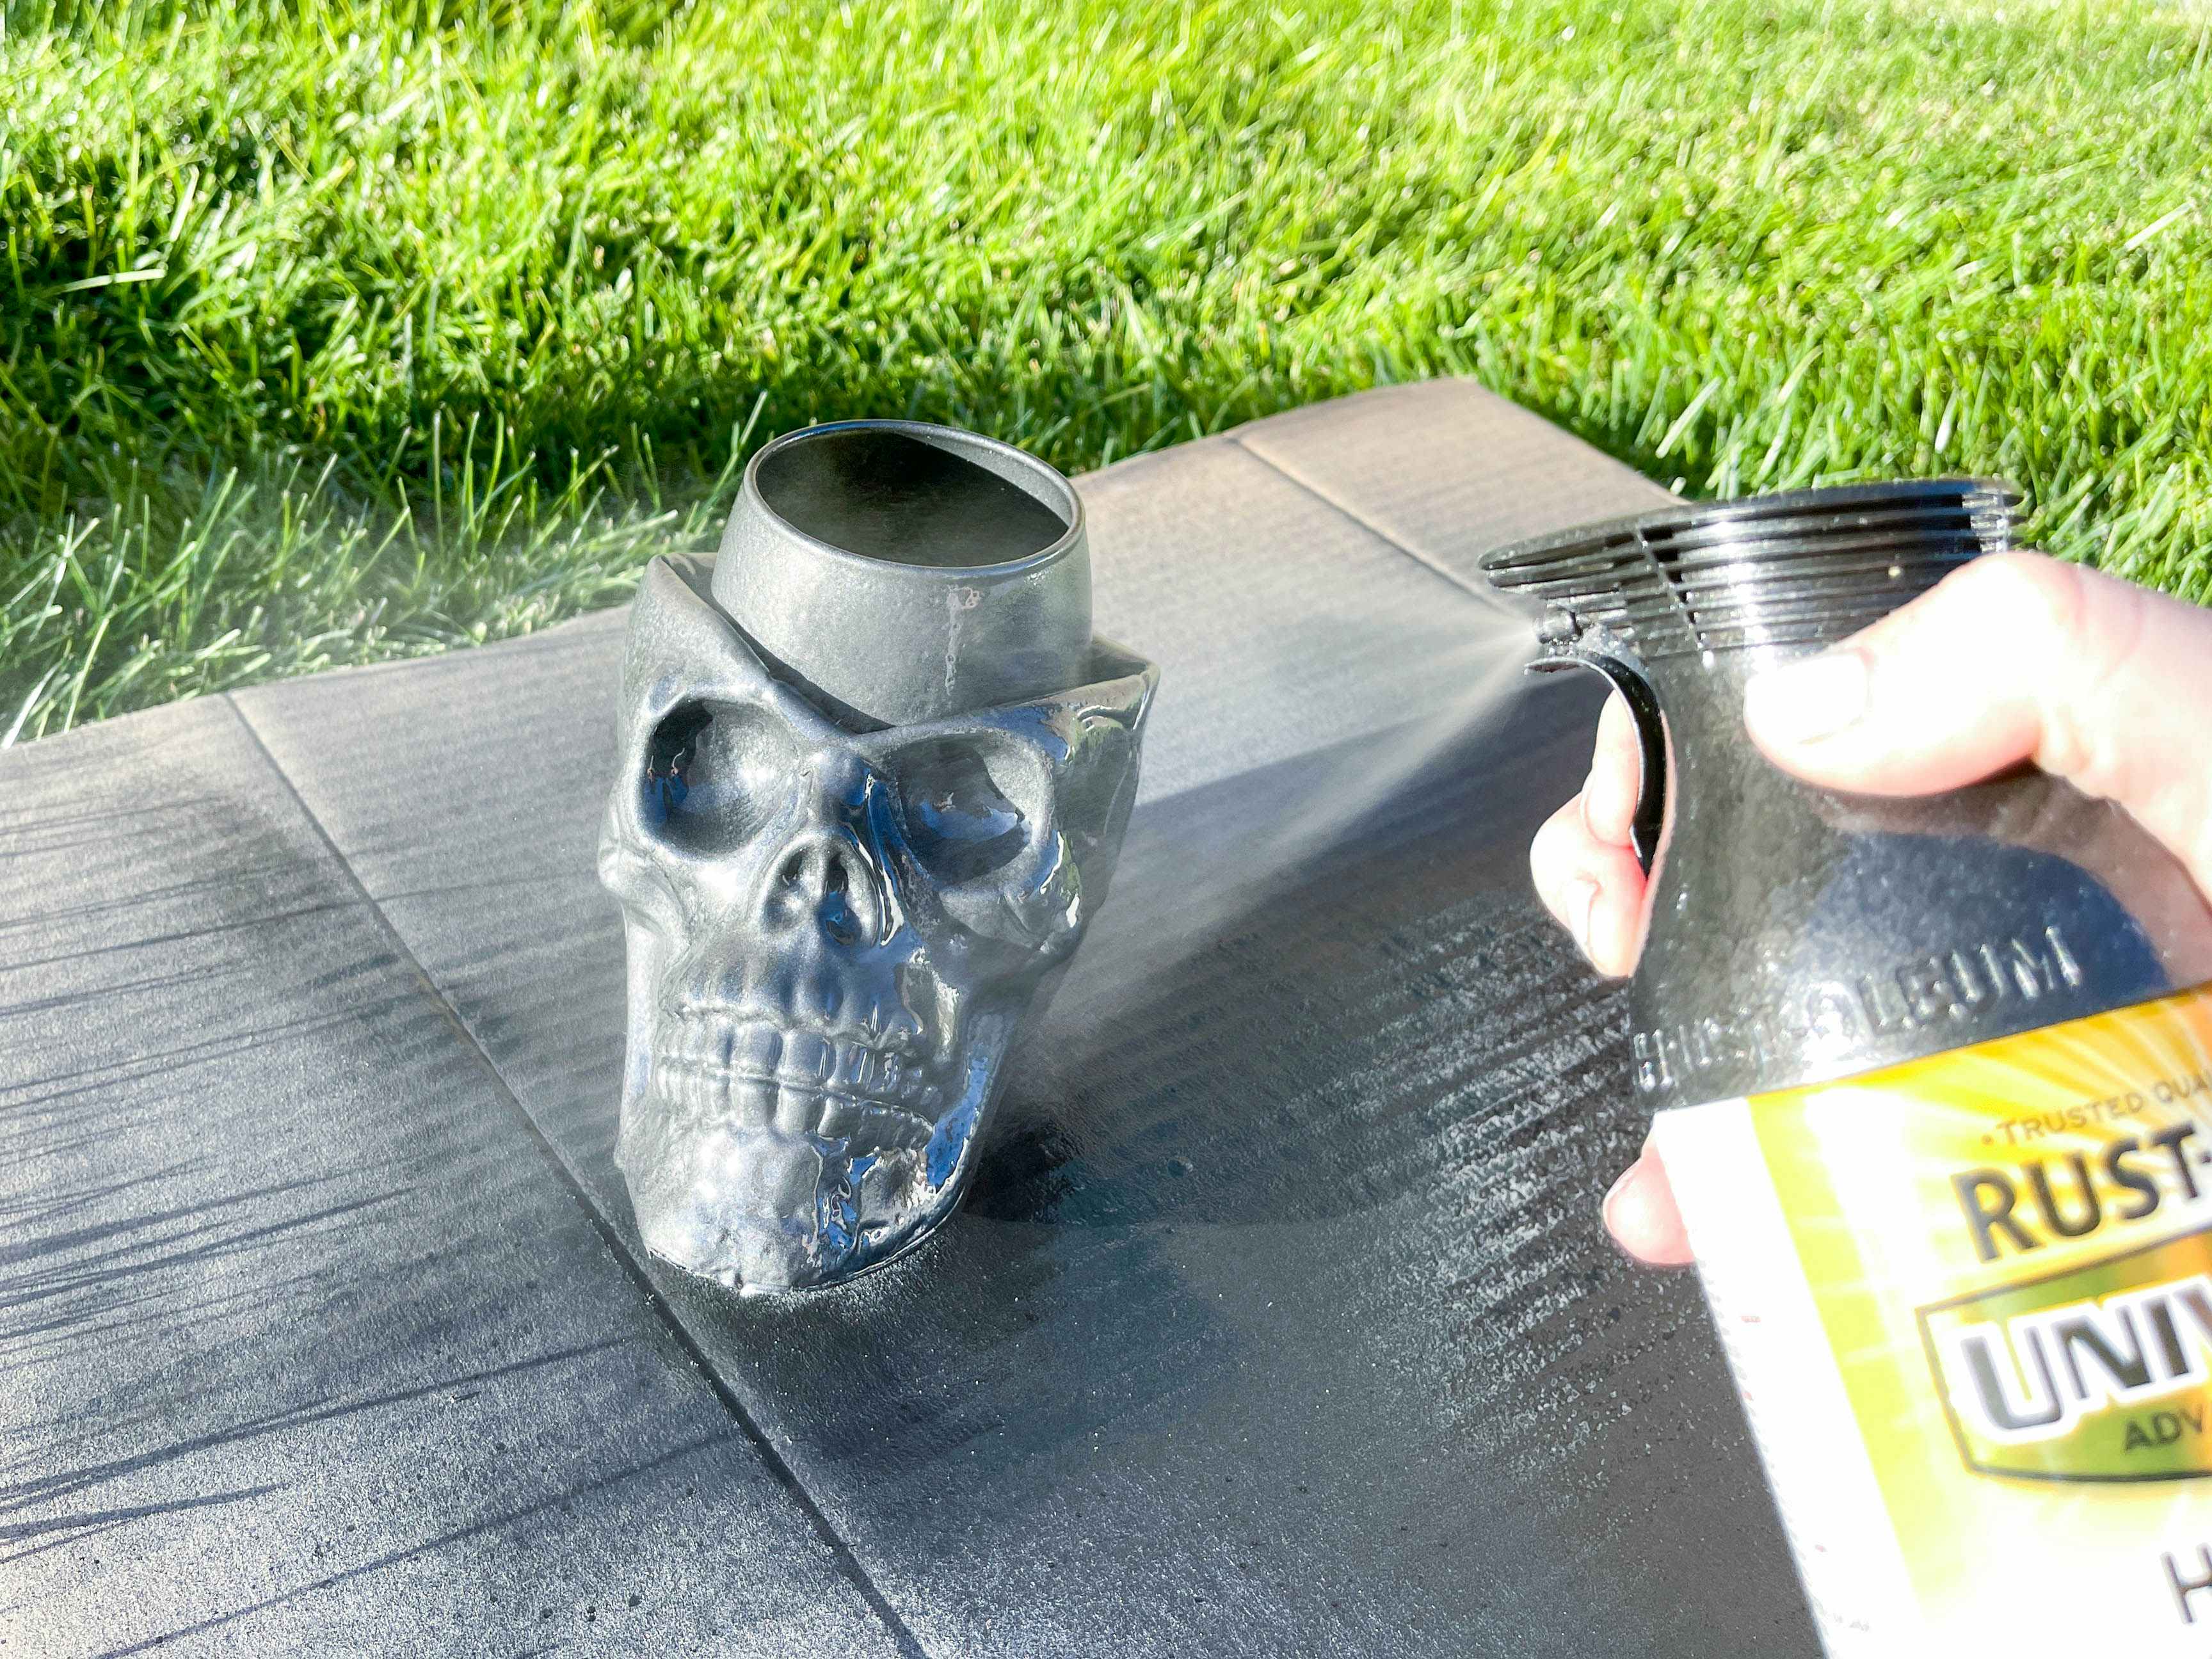 A plastic skull with a glass in the top being spray painted outside on a cardboard piece